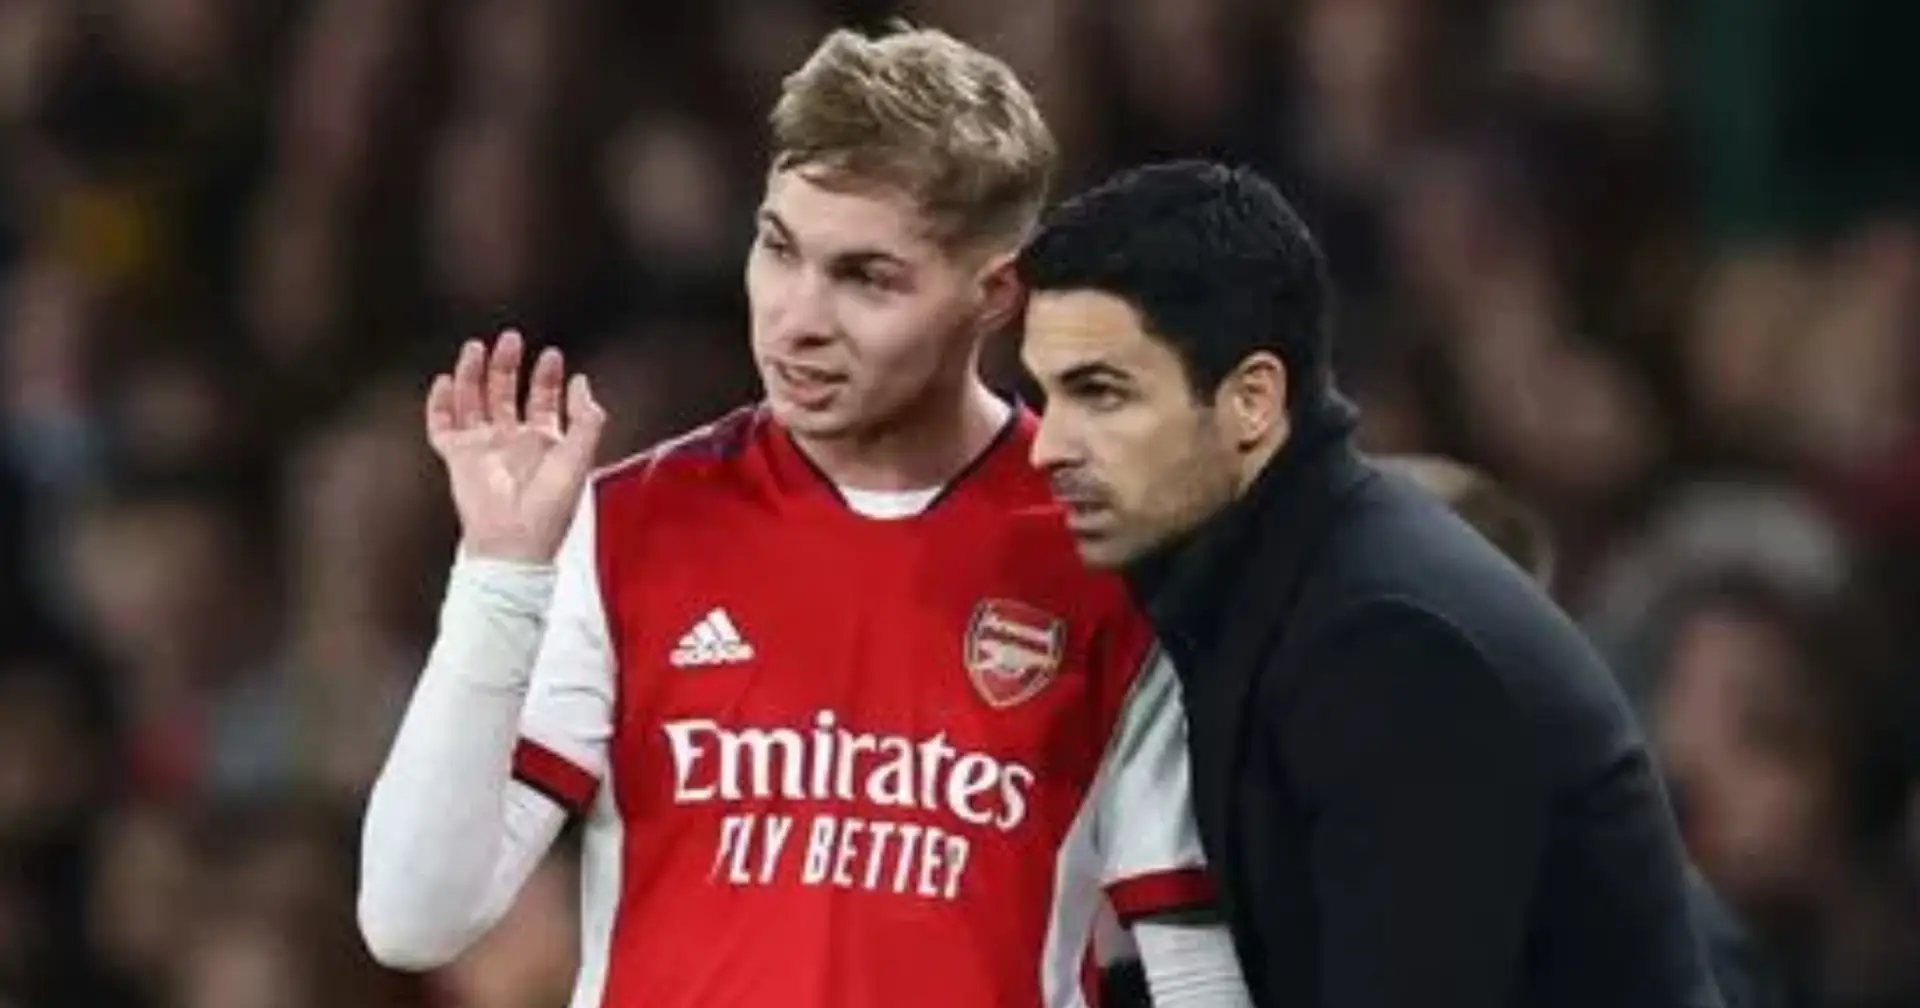 'Arteta won't let him have a chance': Arsenal fans disappointed with Mikel's treatment of Emile Smith Rowe